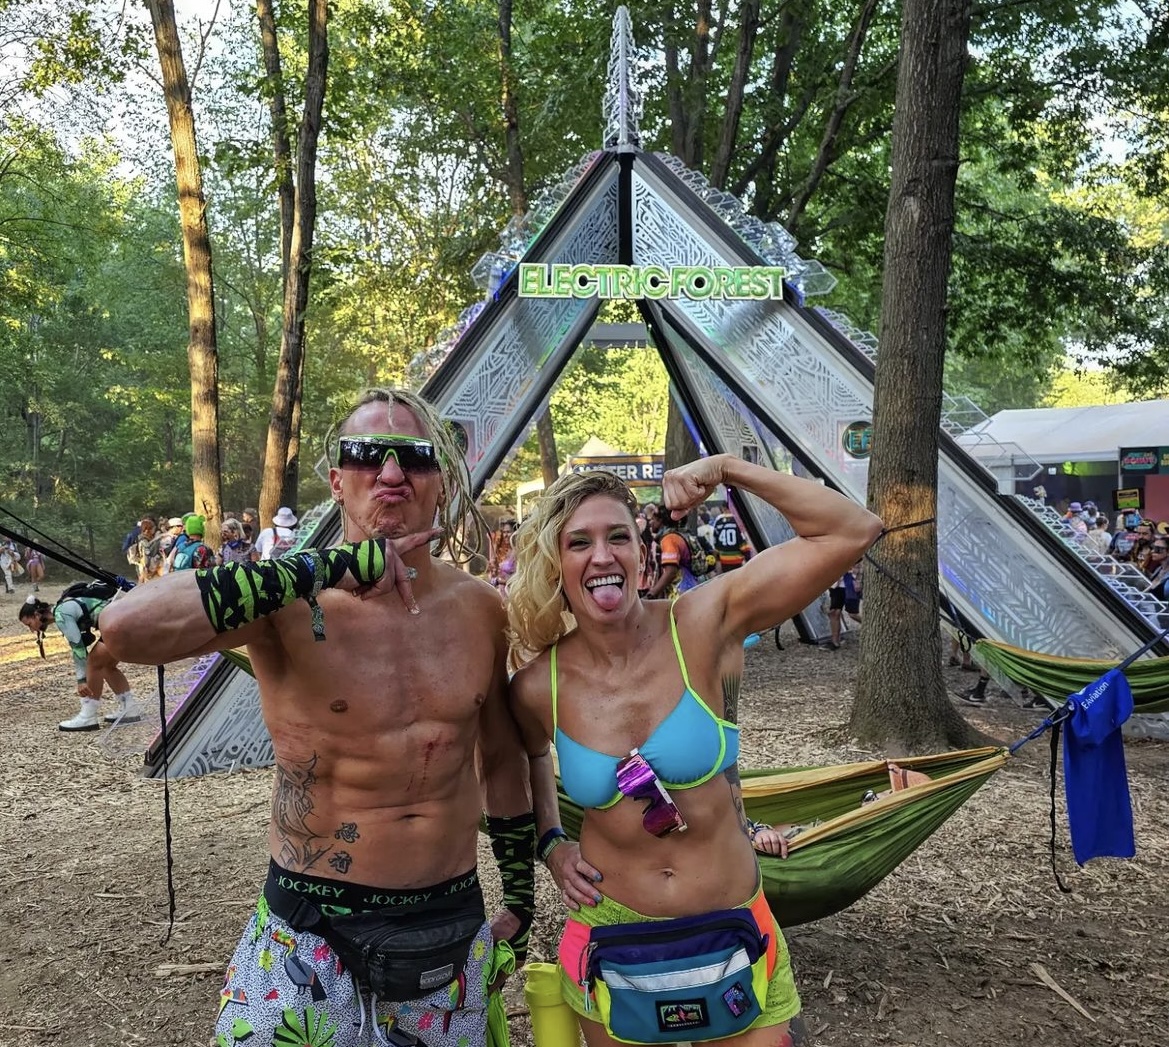 Screen grab of Dani Mo's Instagram post of Facade and Dani Mo at the Electric Forest event. Instagram photo